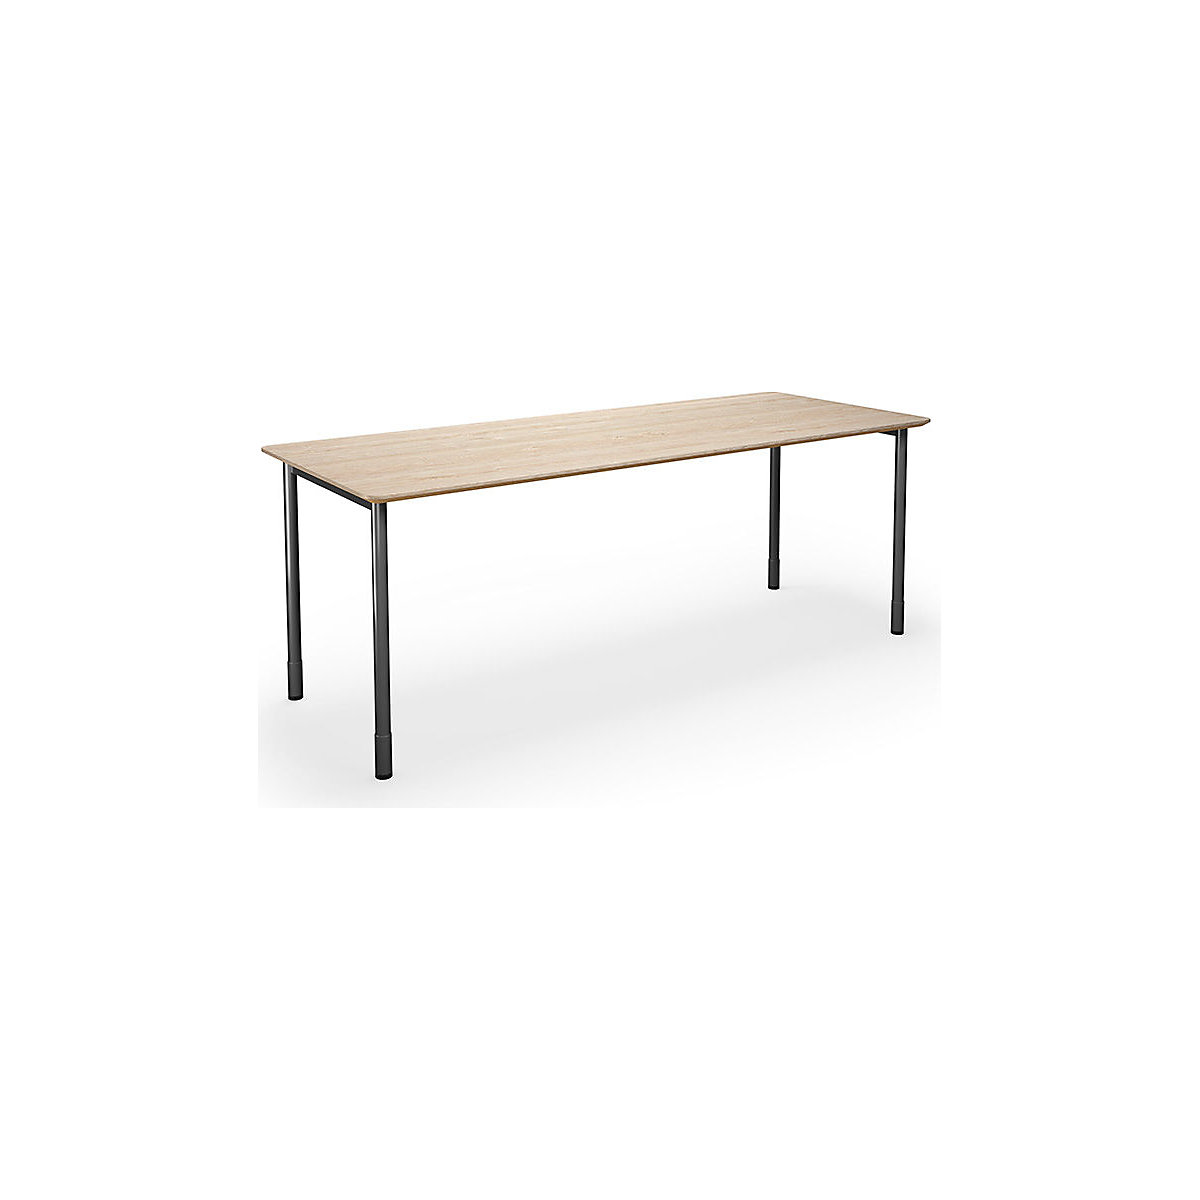 DUO-C Trend multi-purpose desk, straight tabletop, rounded corners